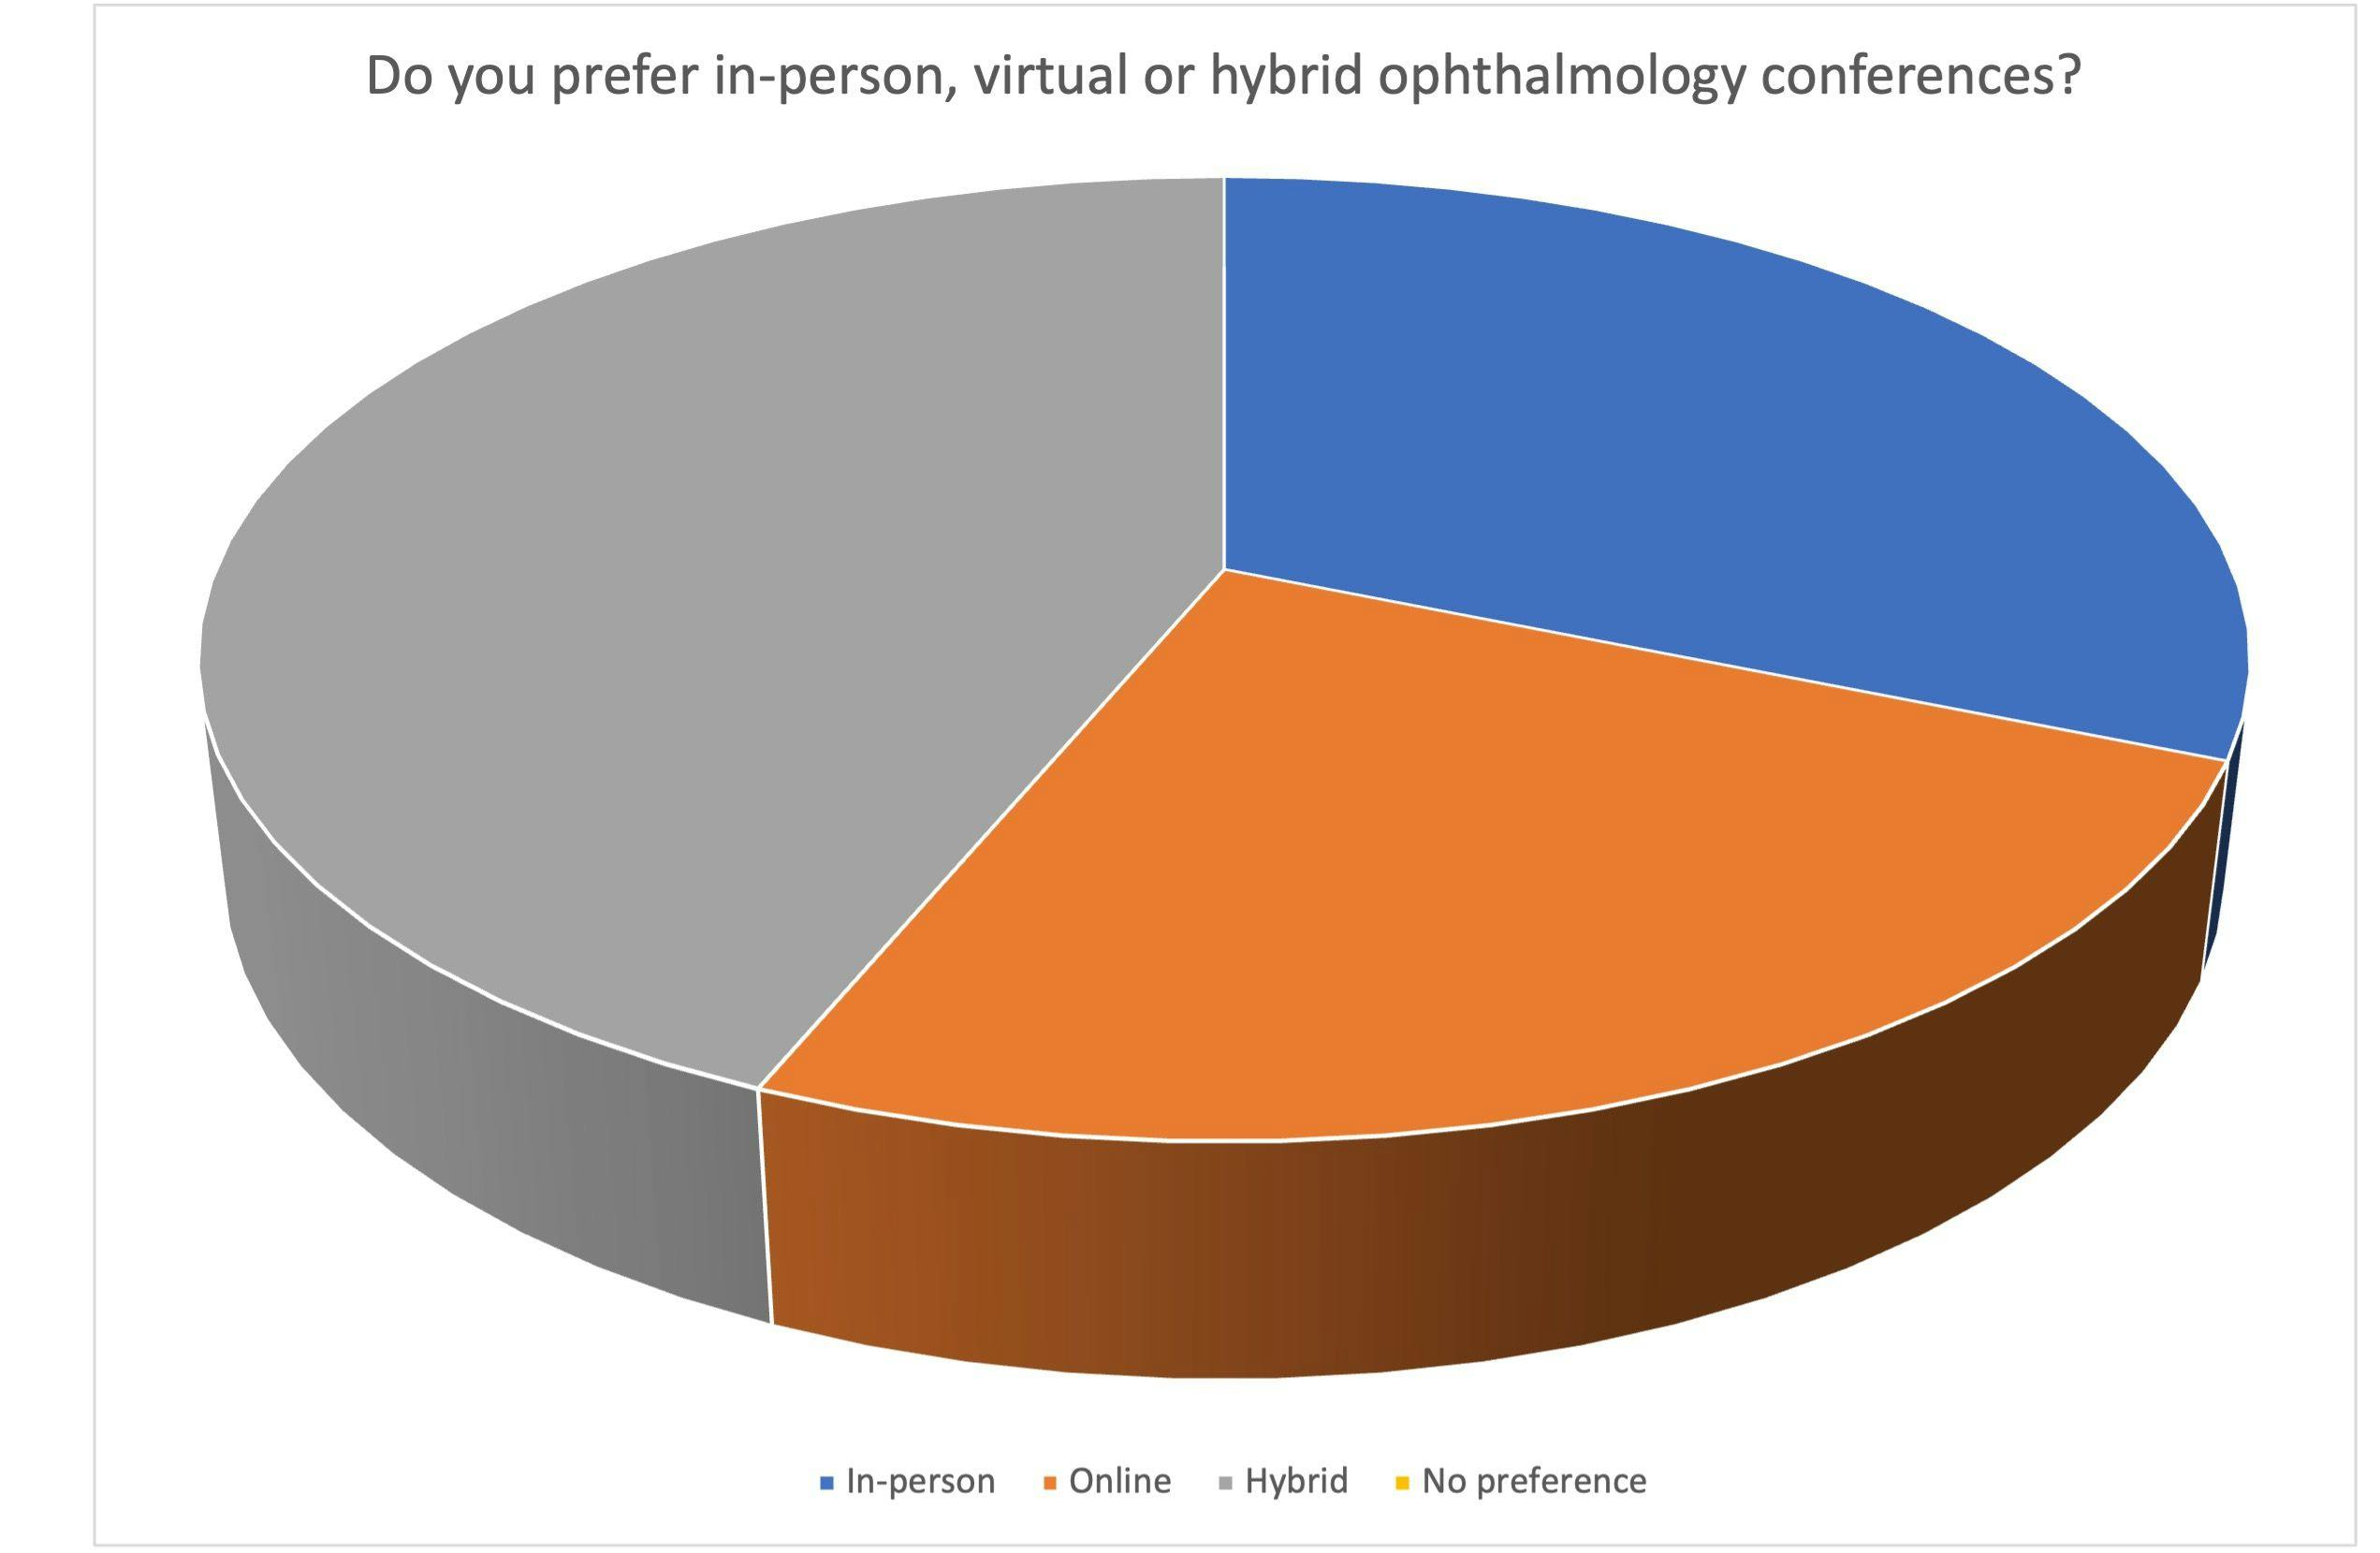 Poll results: Do you prefer in-person, virtual, or hybrid ophthalmology conferences?